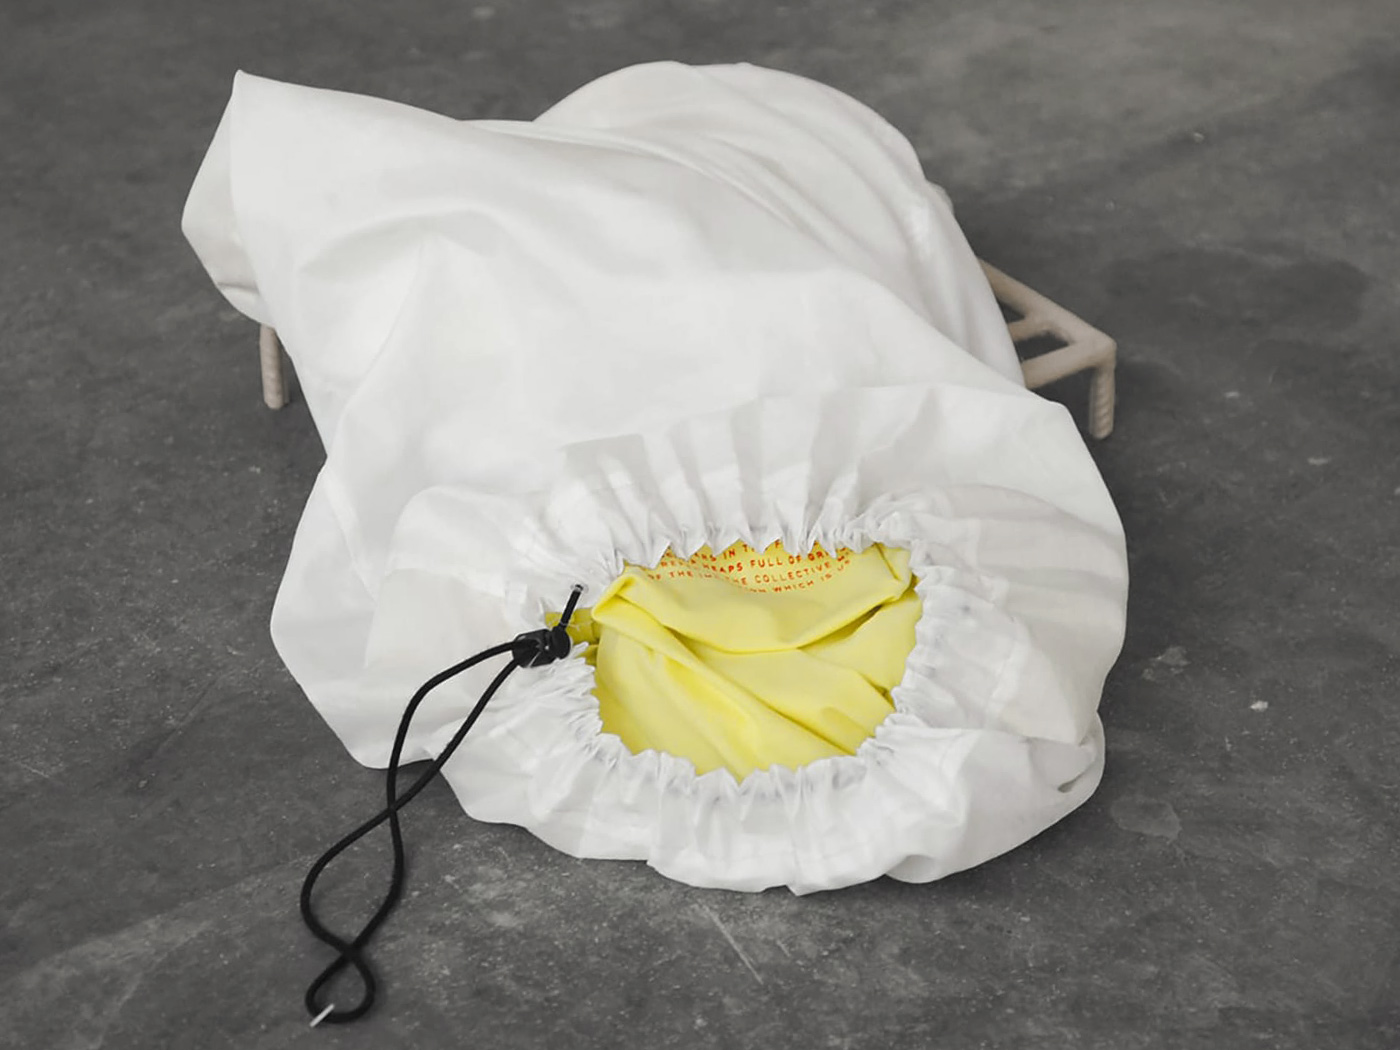 A white laundry bag made of ripstop fabric, the drawstring closure is slightly open. The bag contains a signal yellow item of clothing with red lettering printed on it.